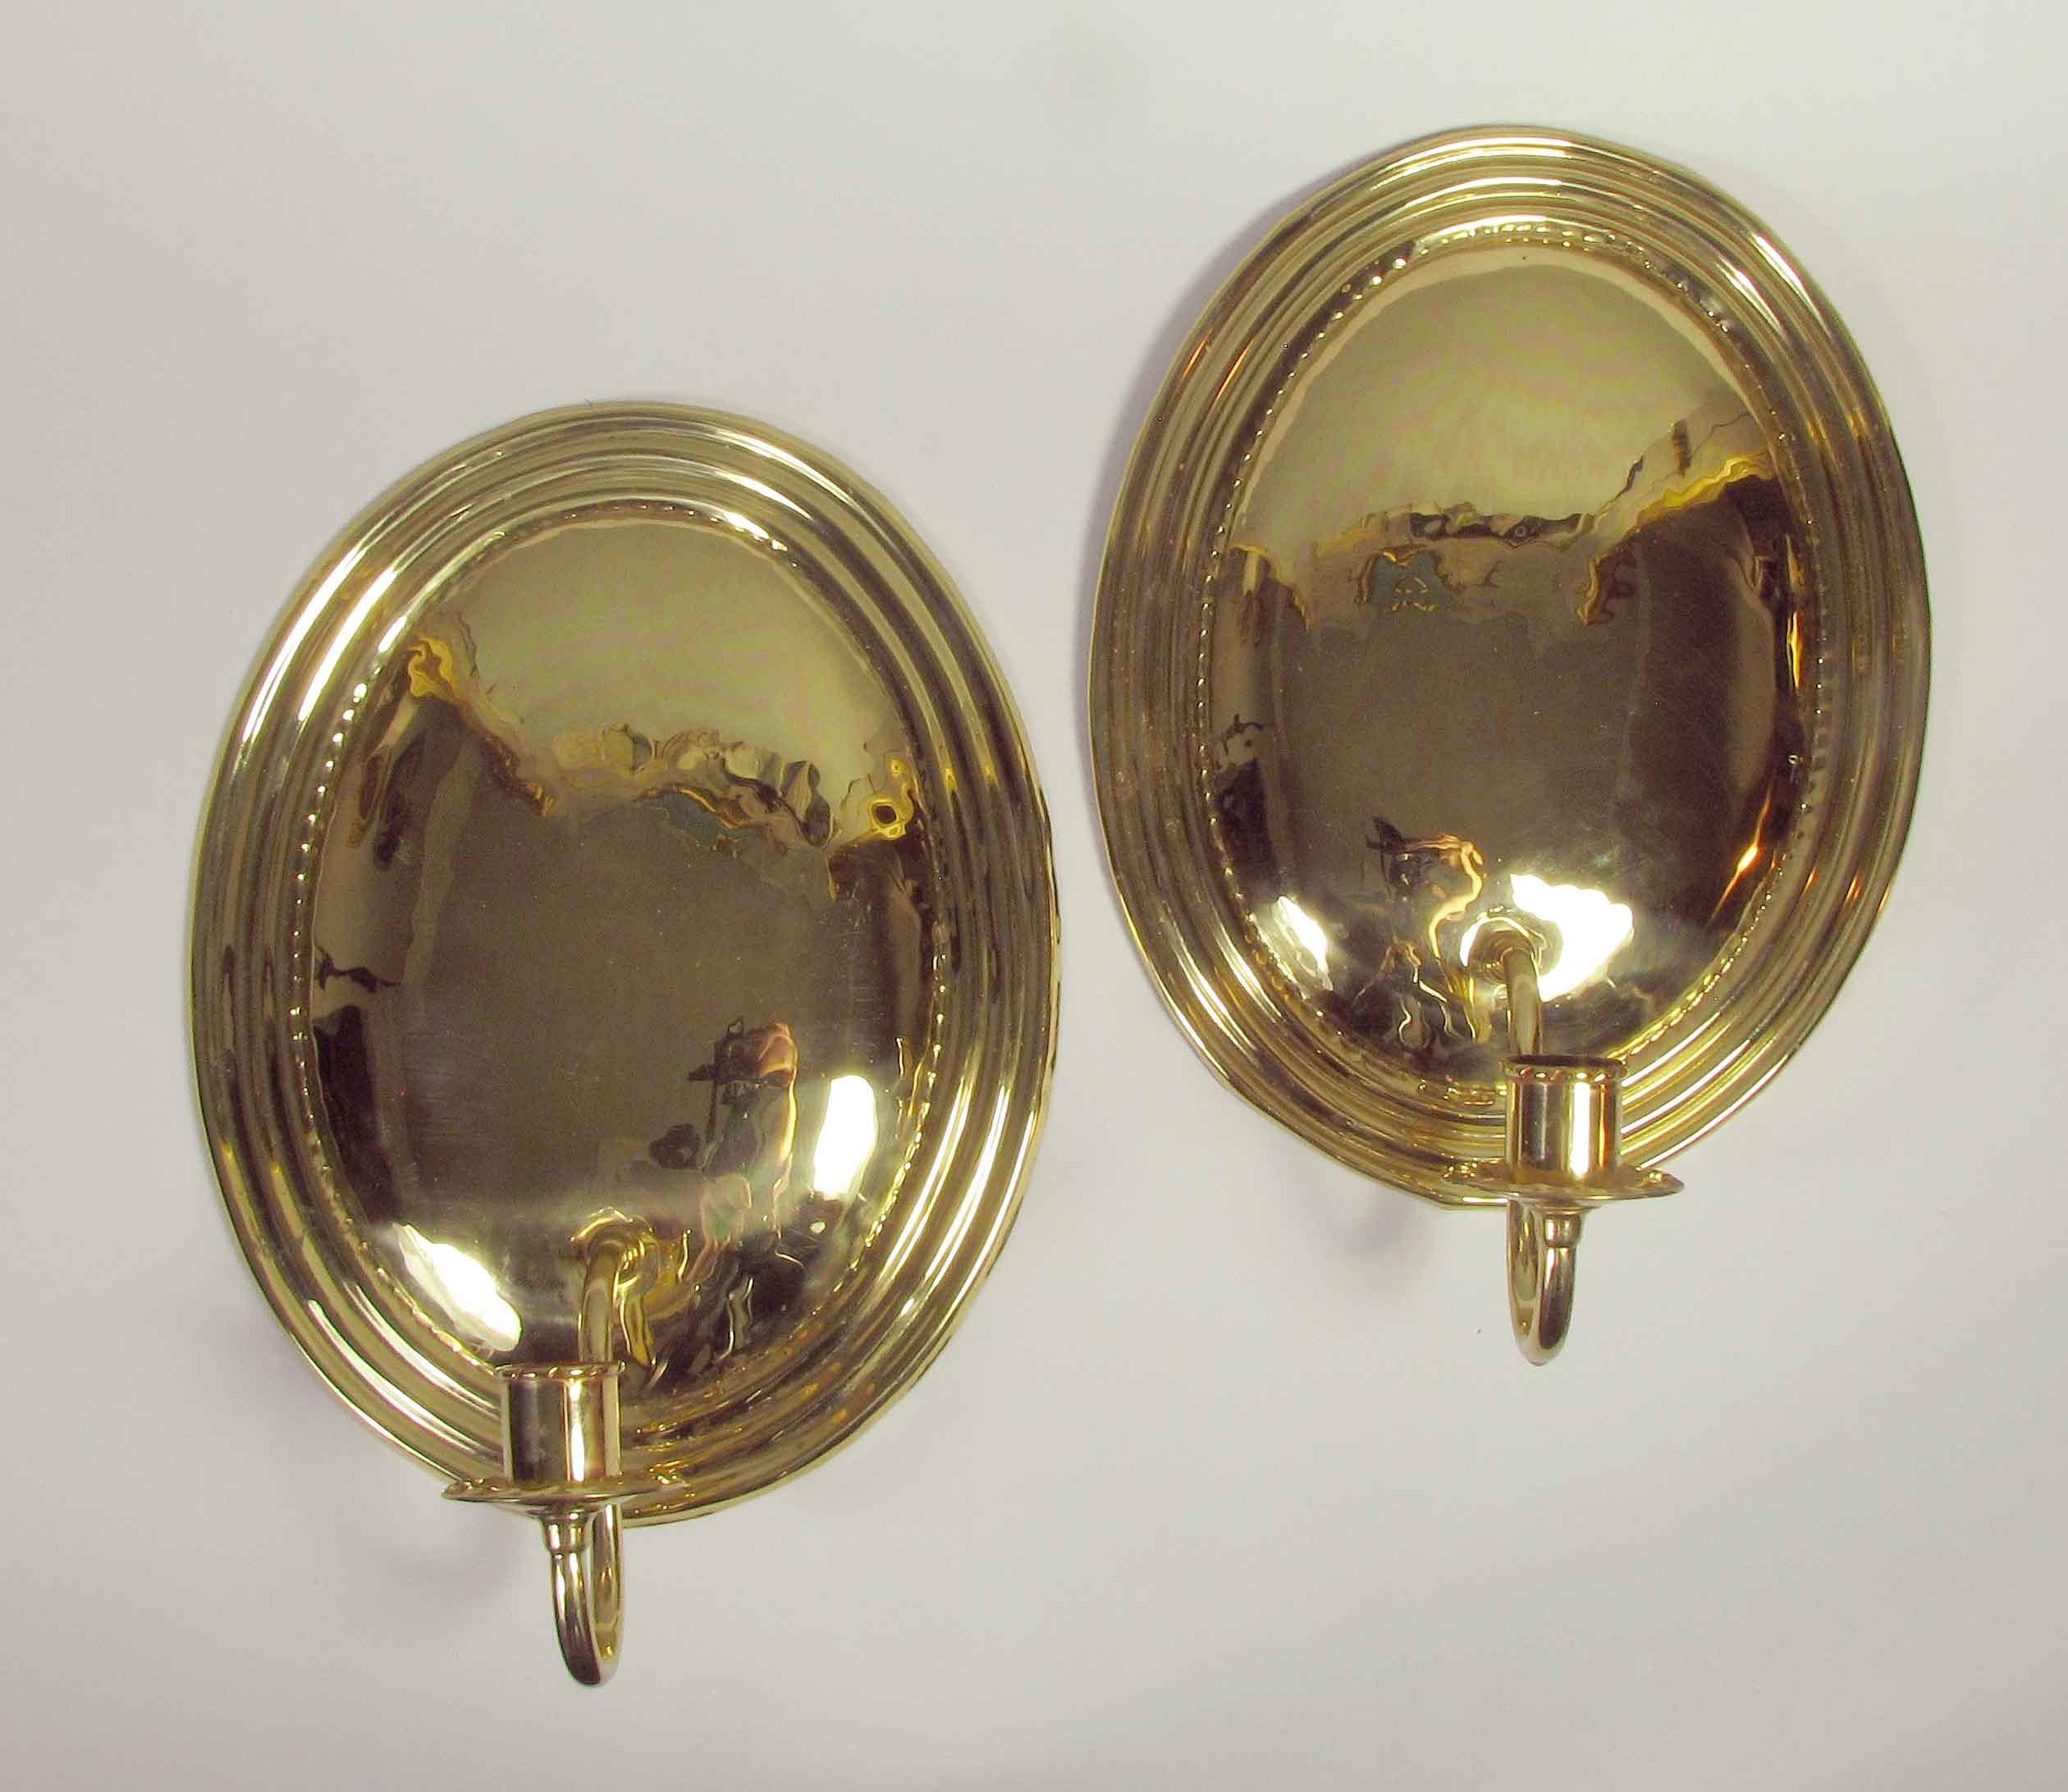 20th Century Pair of North German Repoussé Brass Wall Sconces